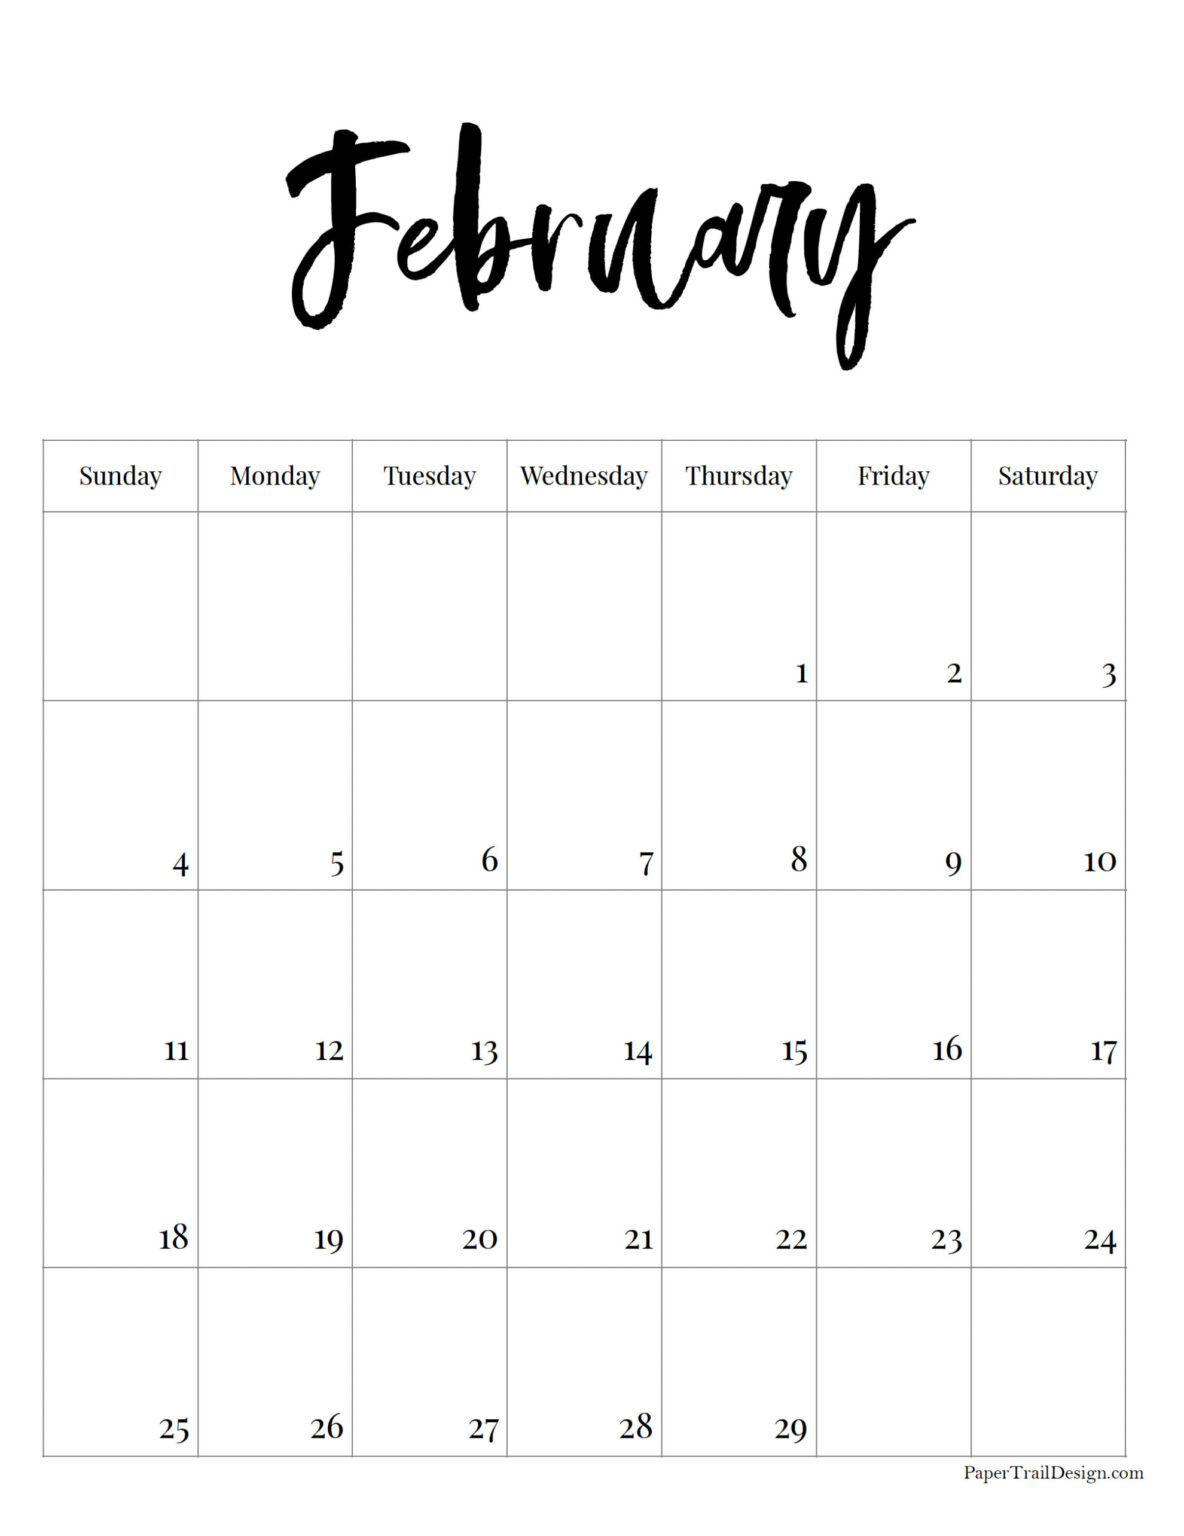 2024 Free Printable Monthly Calendar - Paper Trail Design